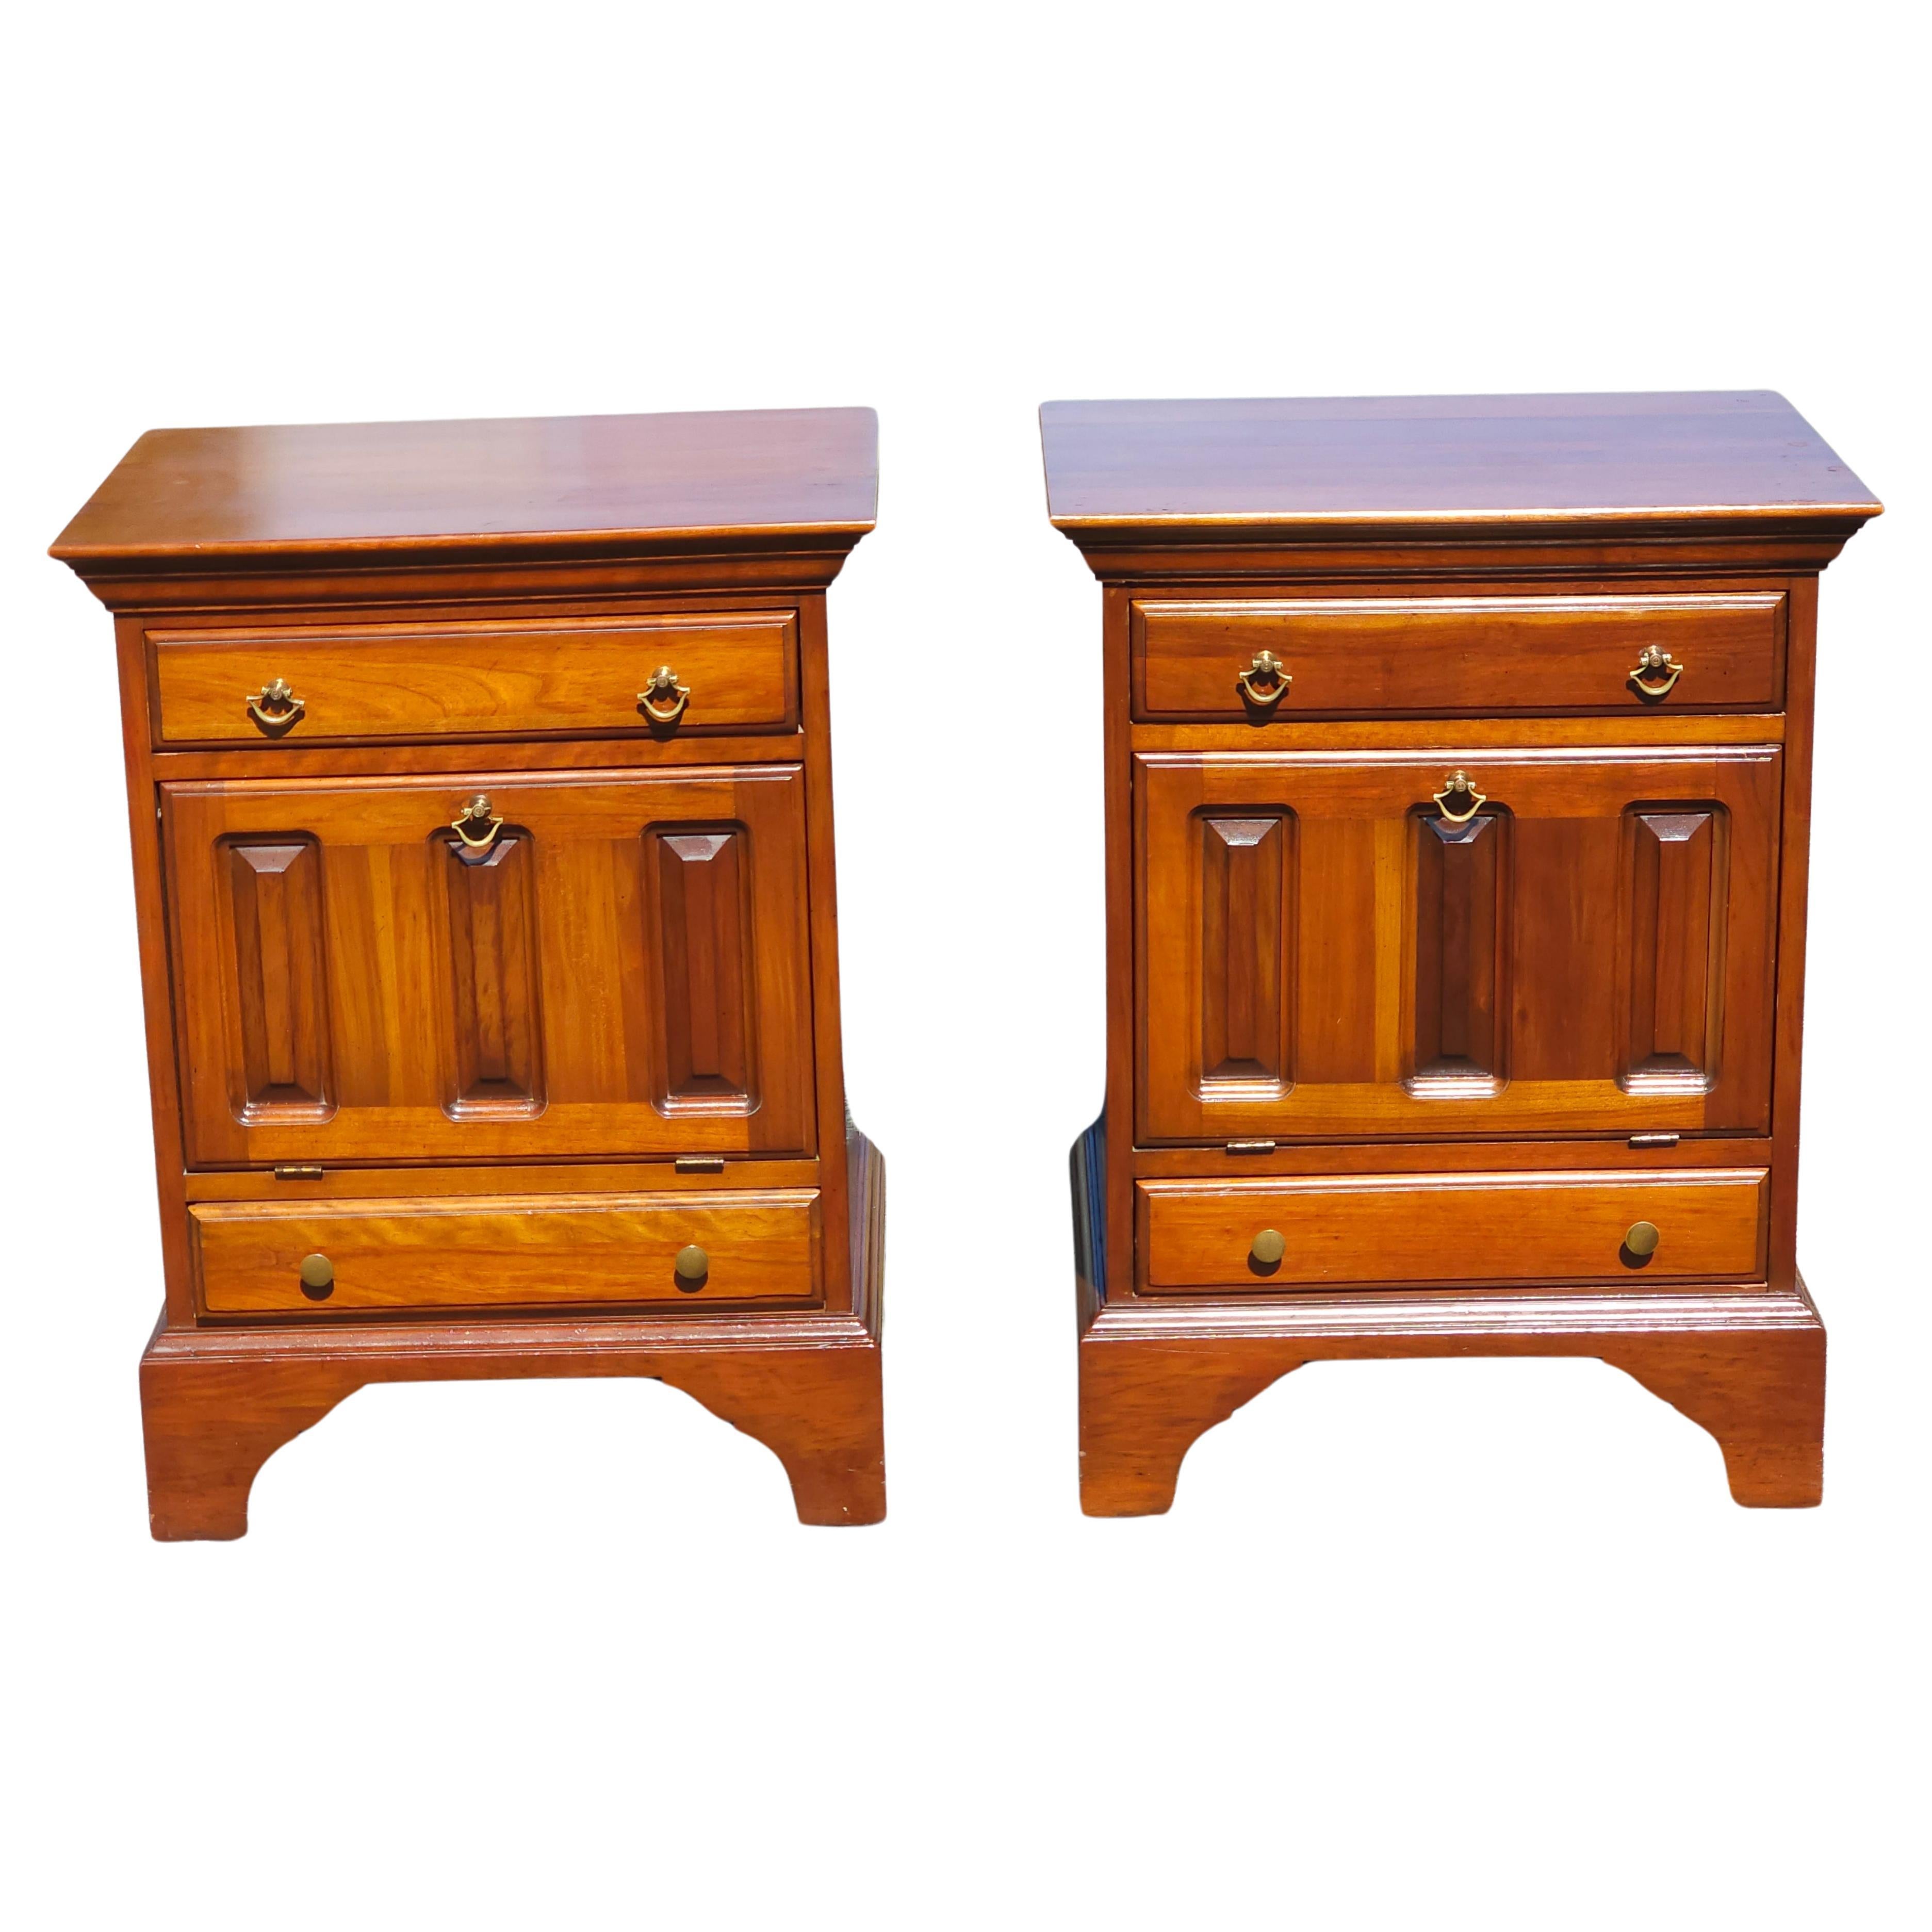 20th Century David Cabinet Cherry 2-Drawer a Abattant Door Bedside Cabinets Pair For Sale